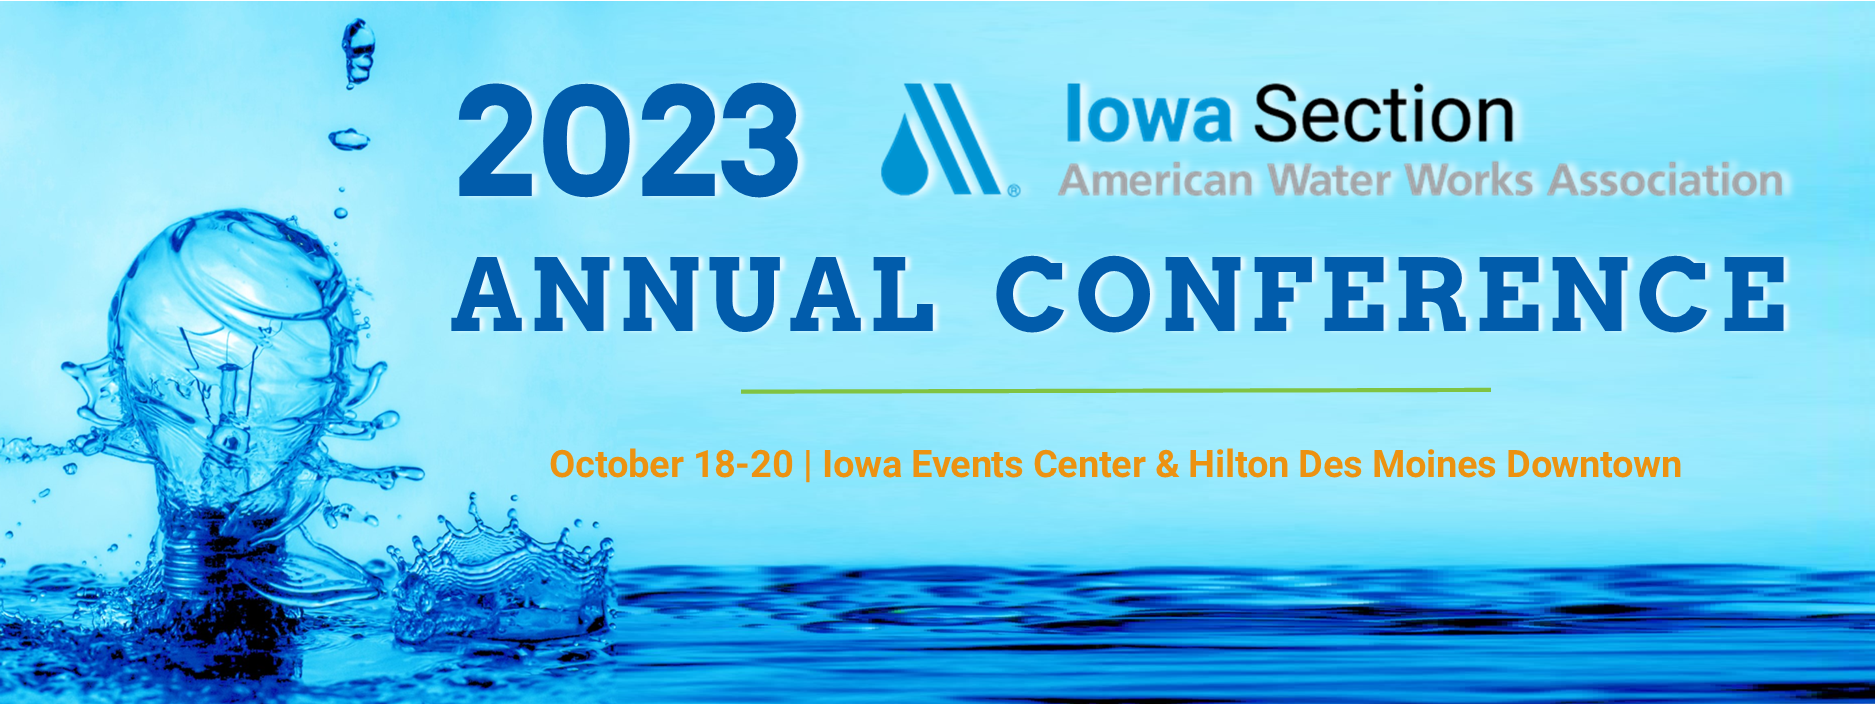 2023 Iowa Section AWWA Annual Conference